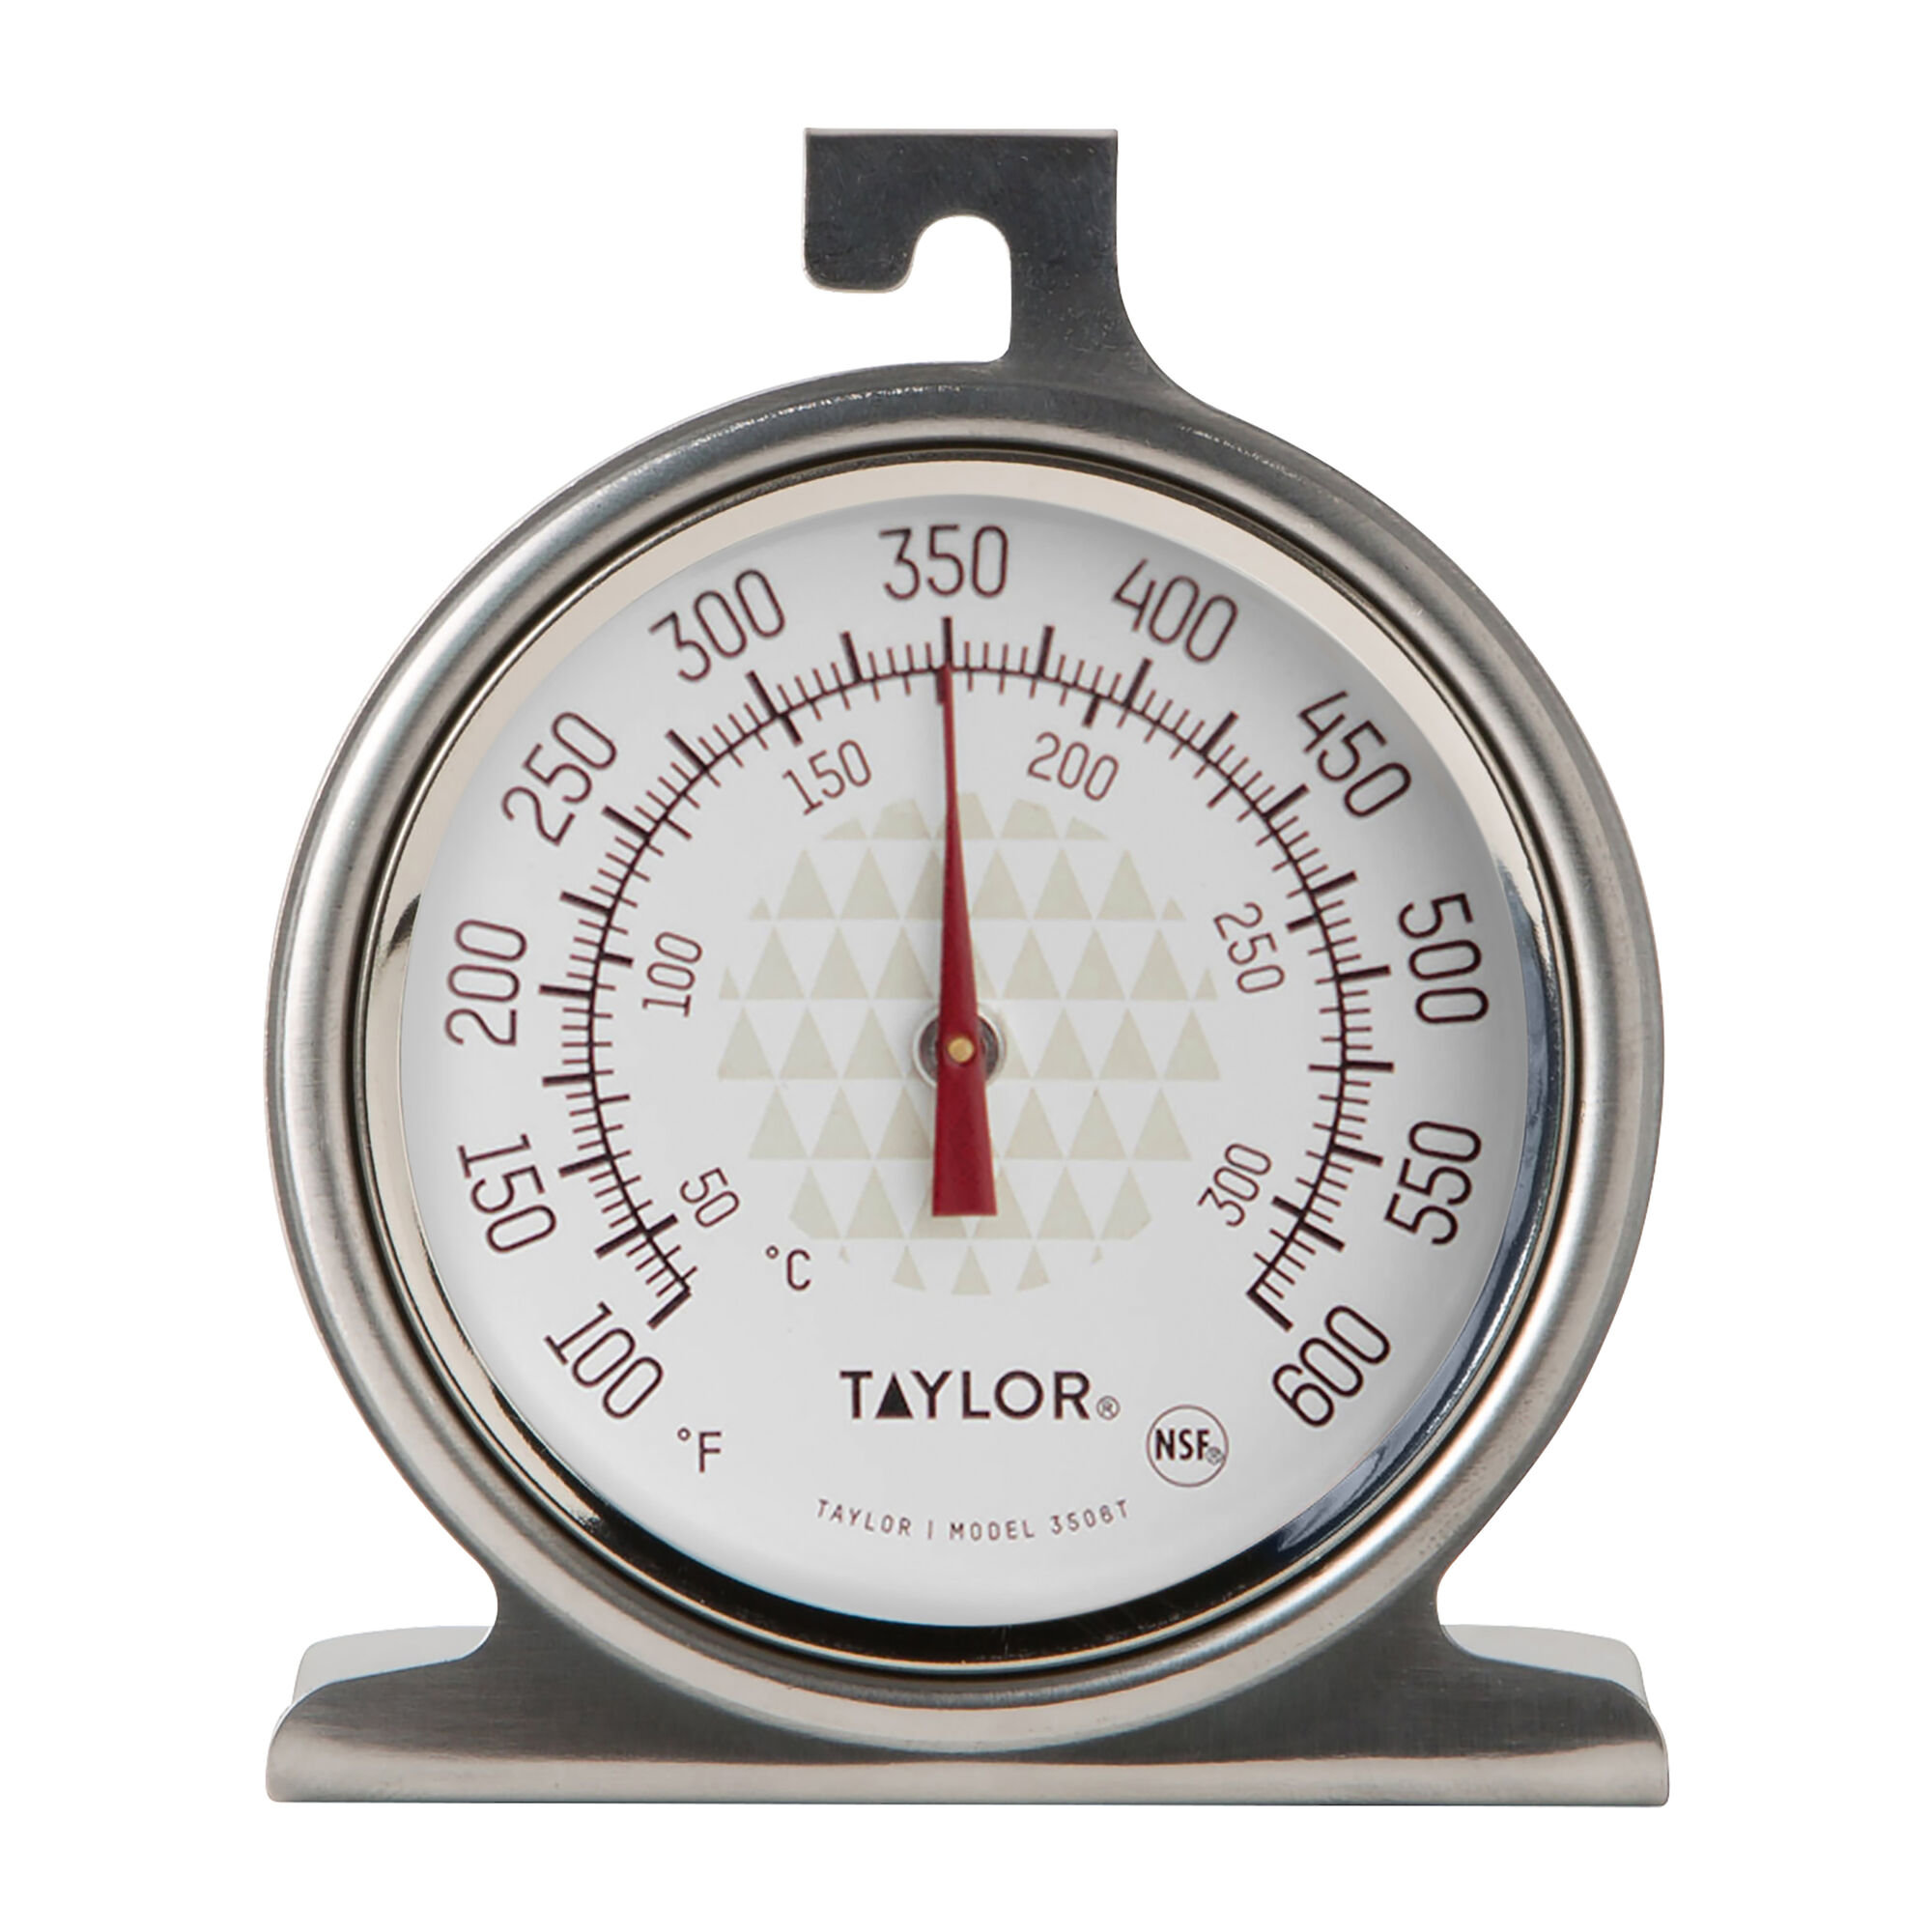 CDN POT750X ProAccurate 2 Dial High-Heat Oven Thermometer